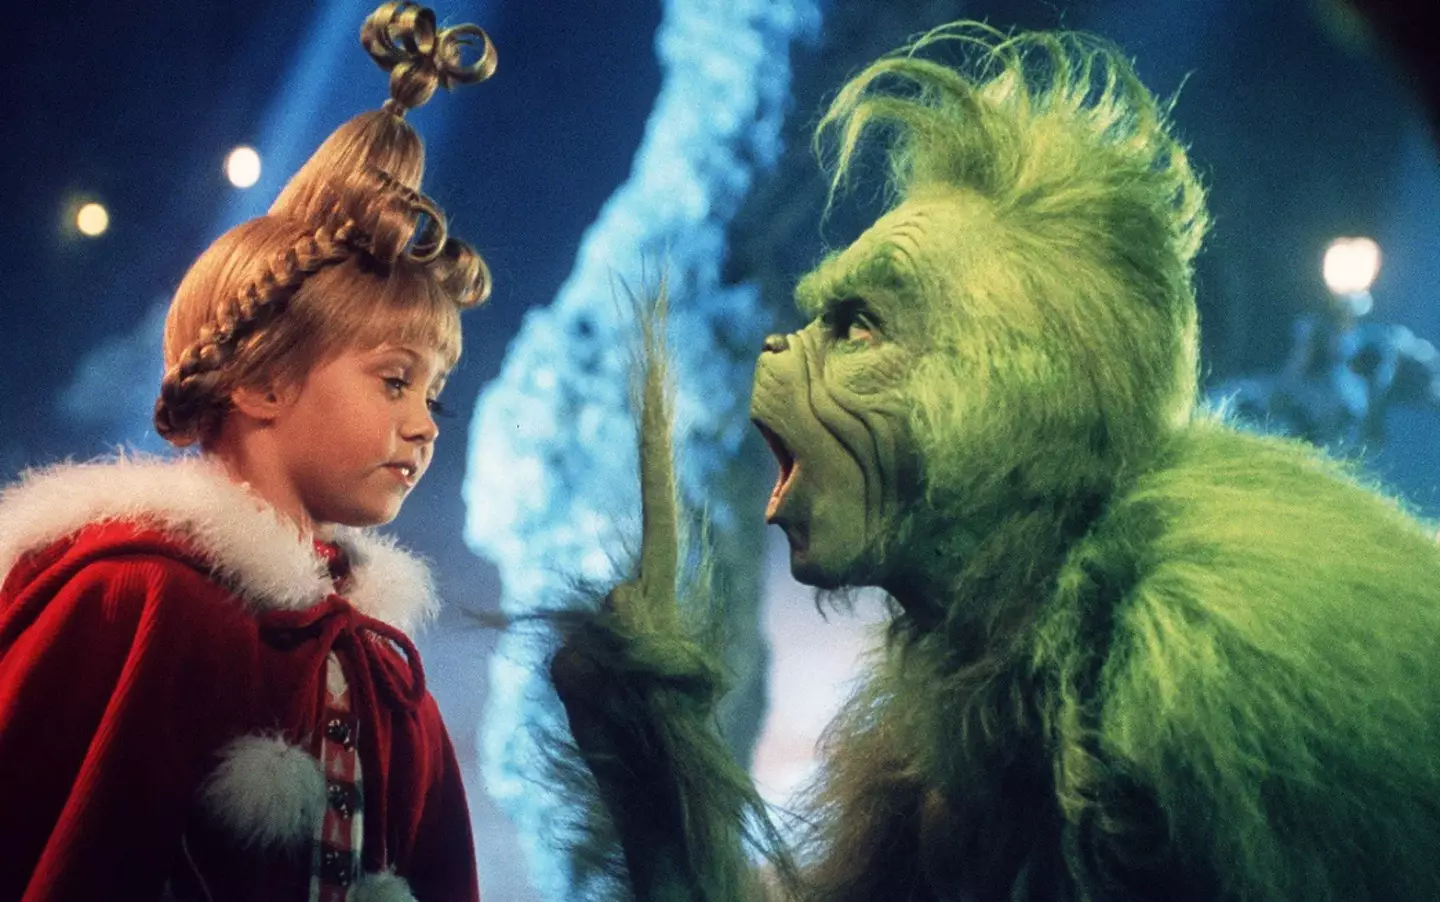 Taylor Momsen as Cindy Lou Who alongside Jim Carrey in The Grinch.